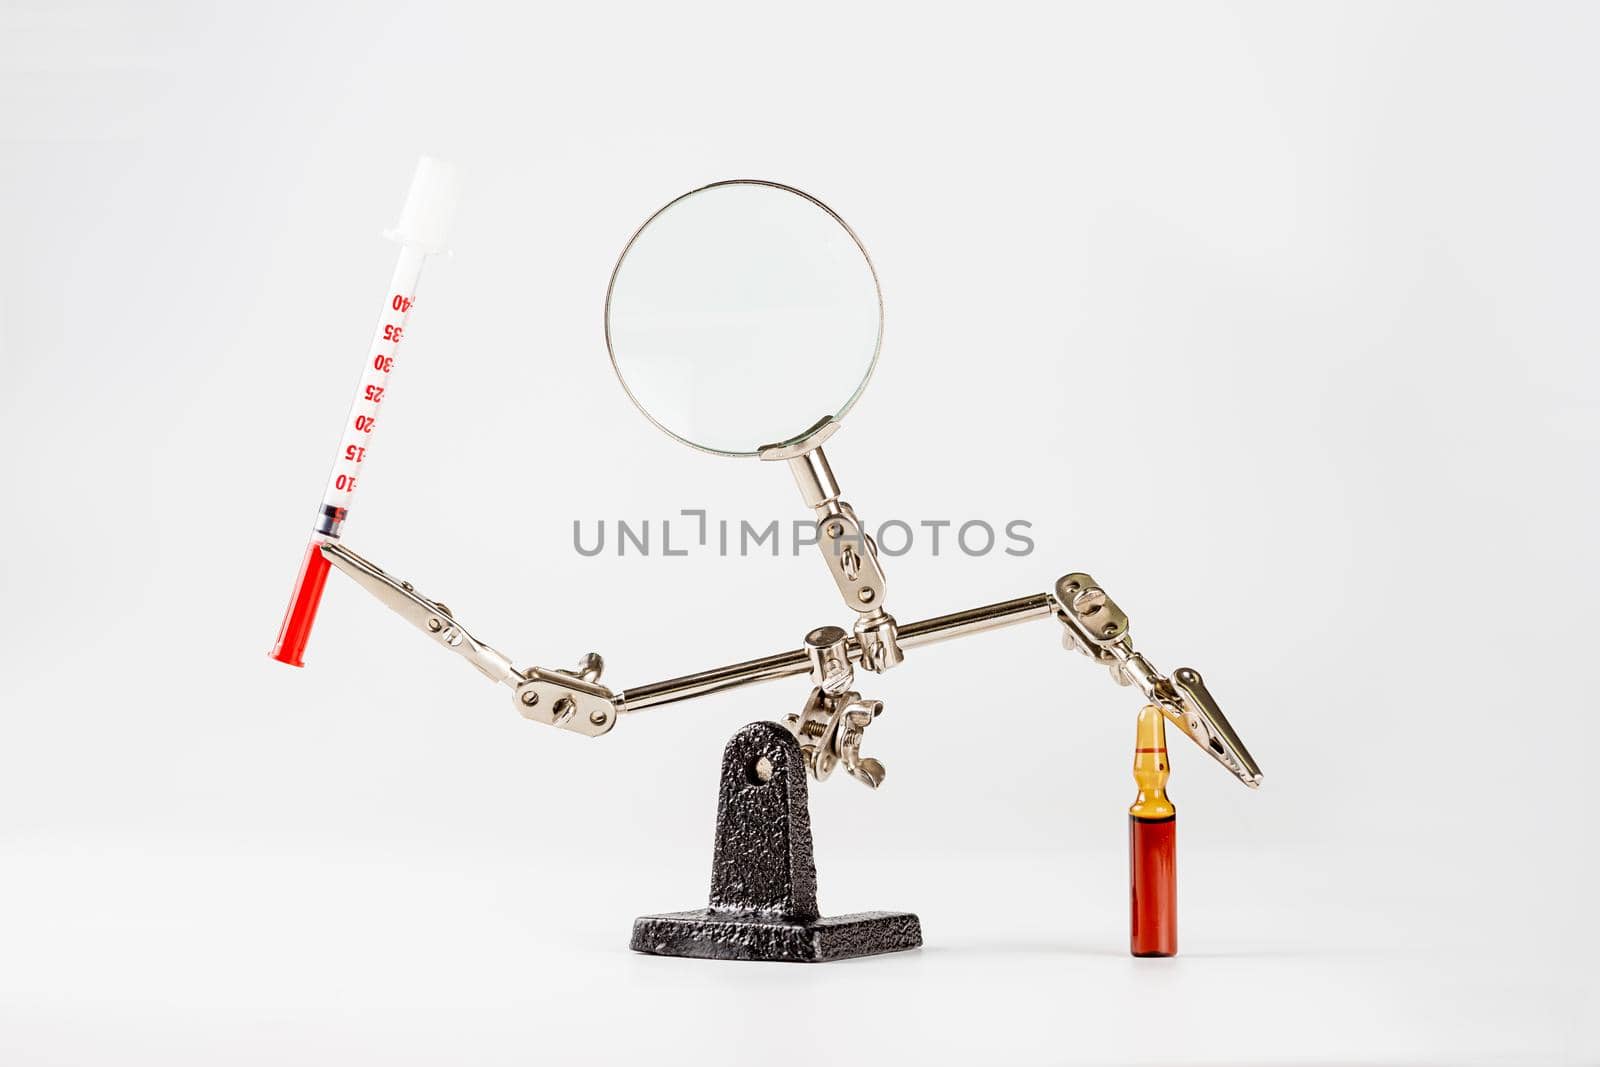 Abstract pharmaceutical background with engineering tool third hand holding ampoule and syringe isolated on white background